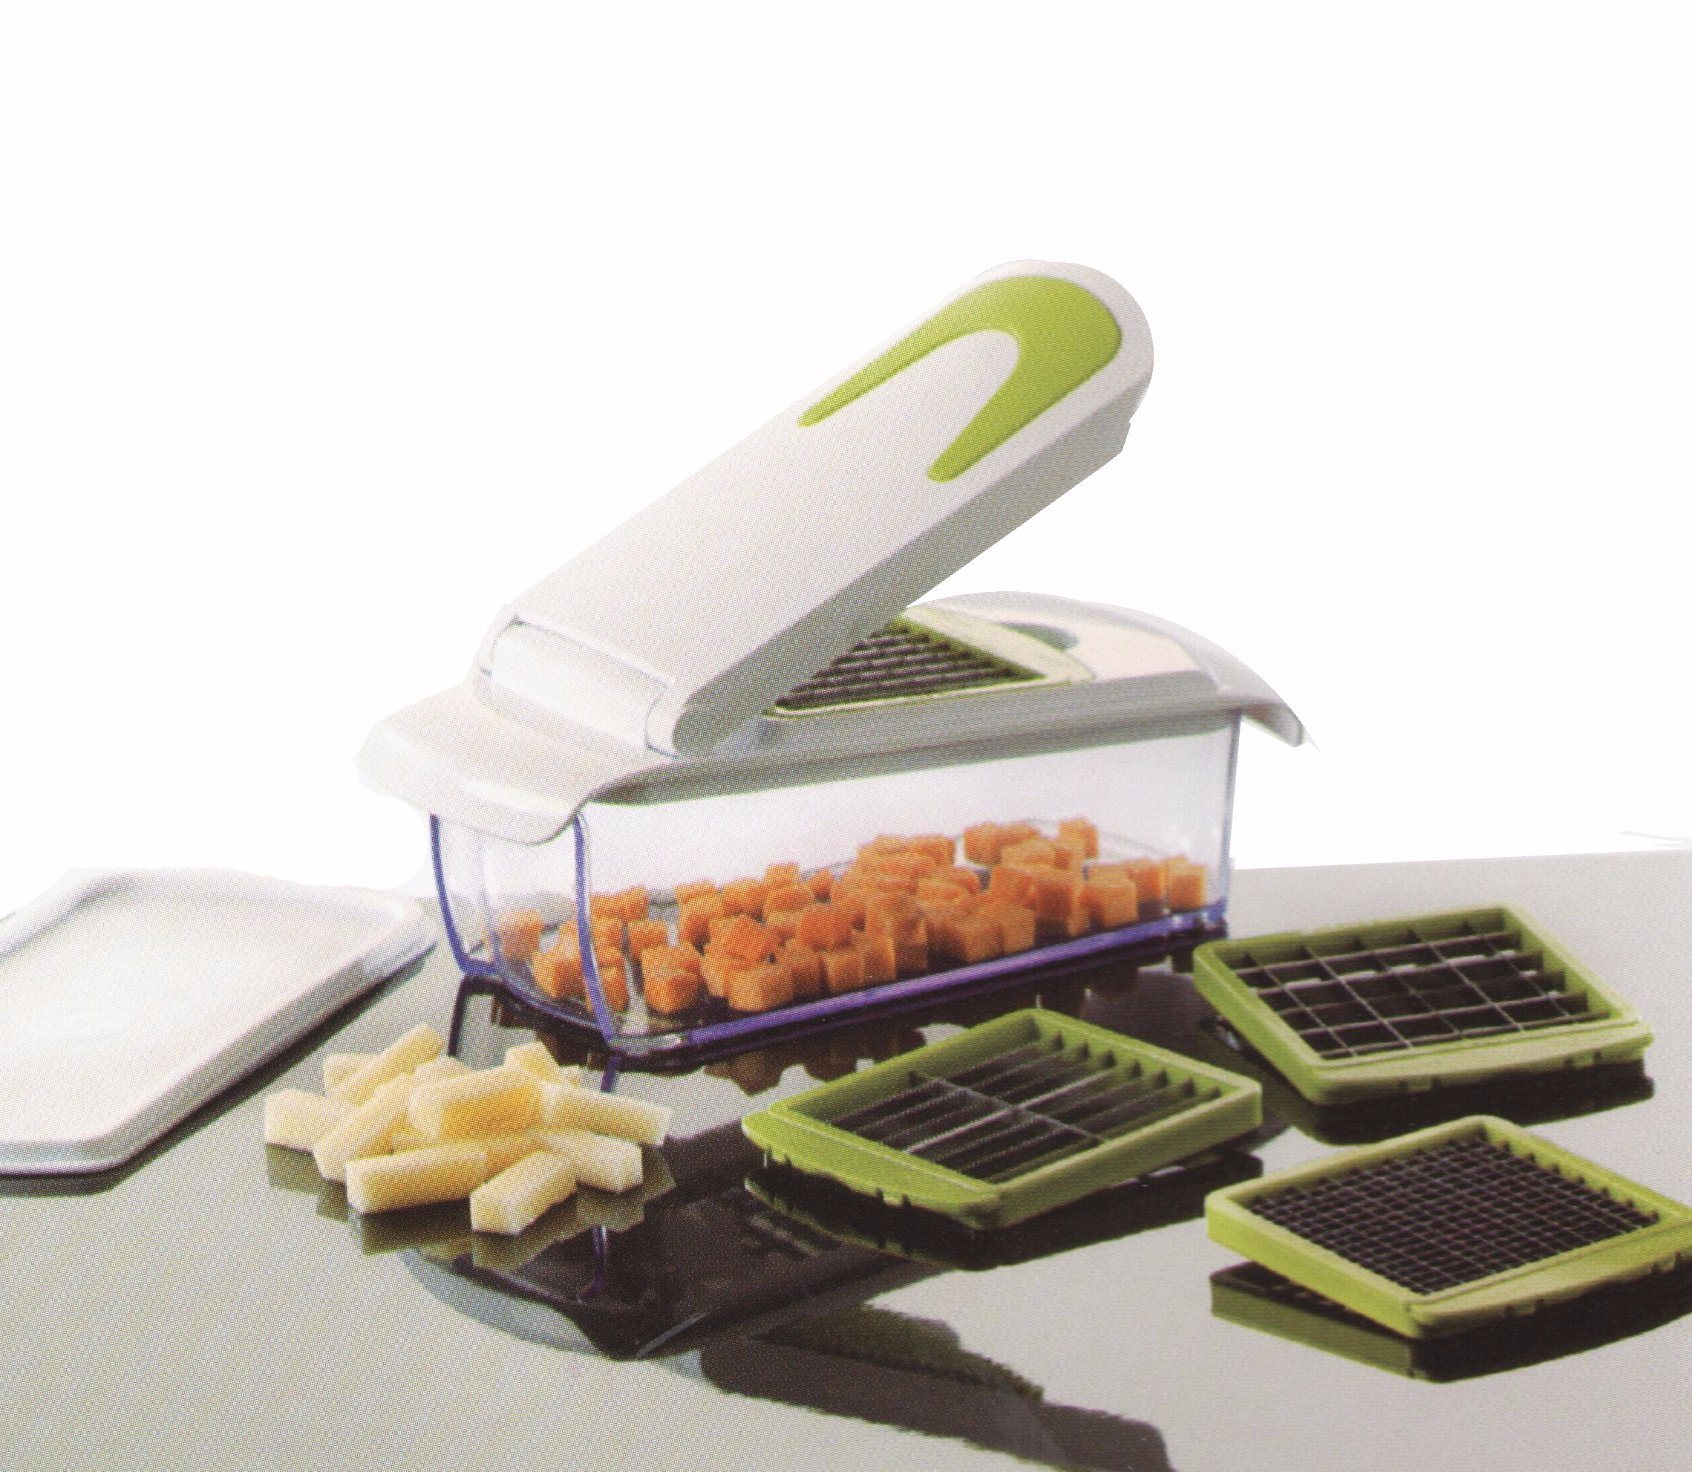 4 in 1 Plastic Vegetable Cutting Food Chopper Dice and Slice Machine Cg072